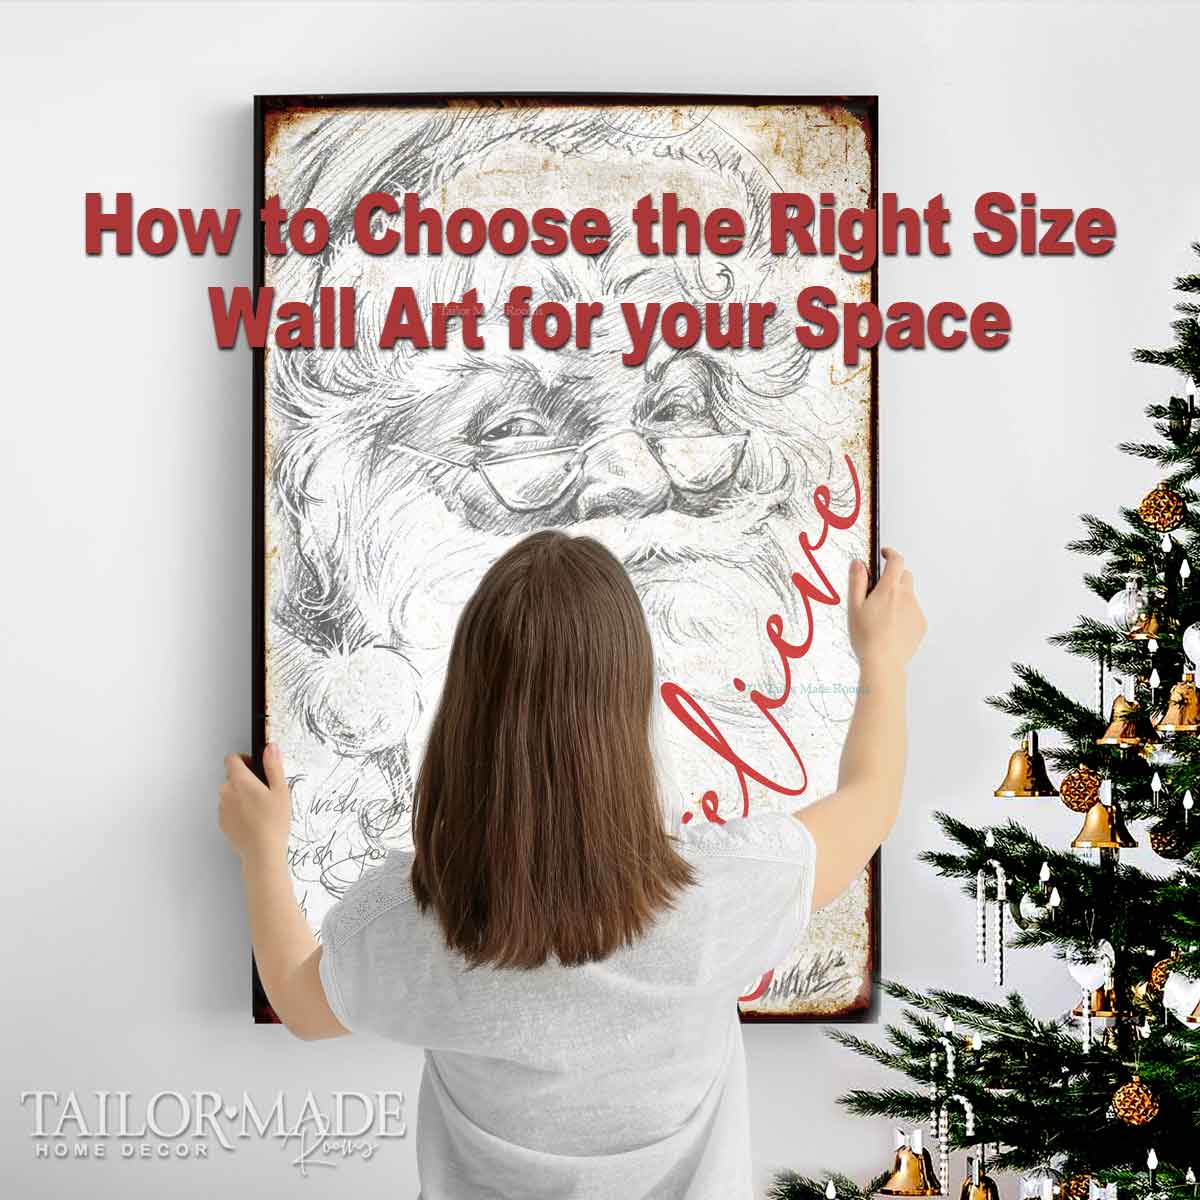 How to Choose the Right Size Wall Art for your Space